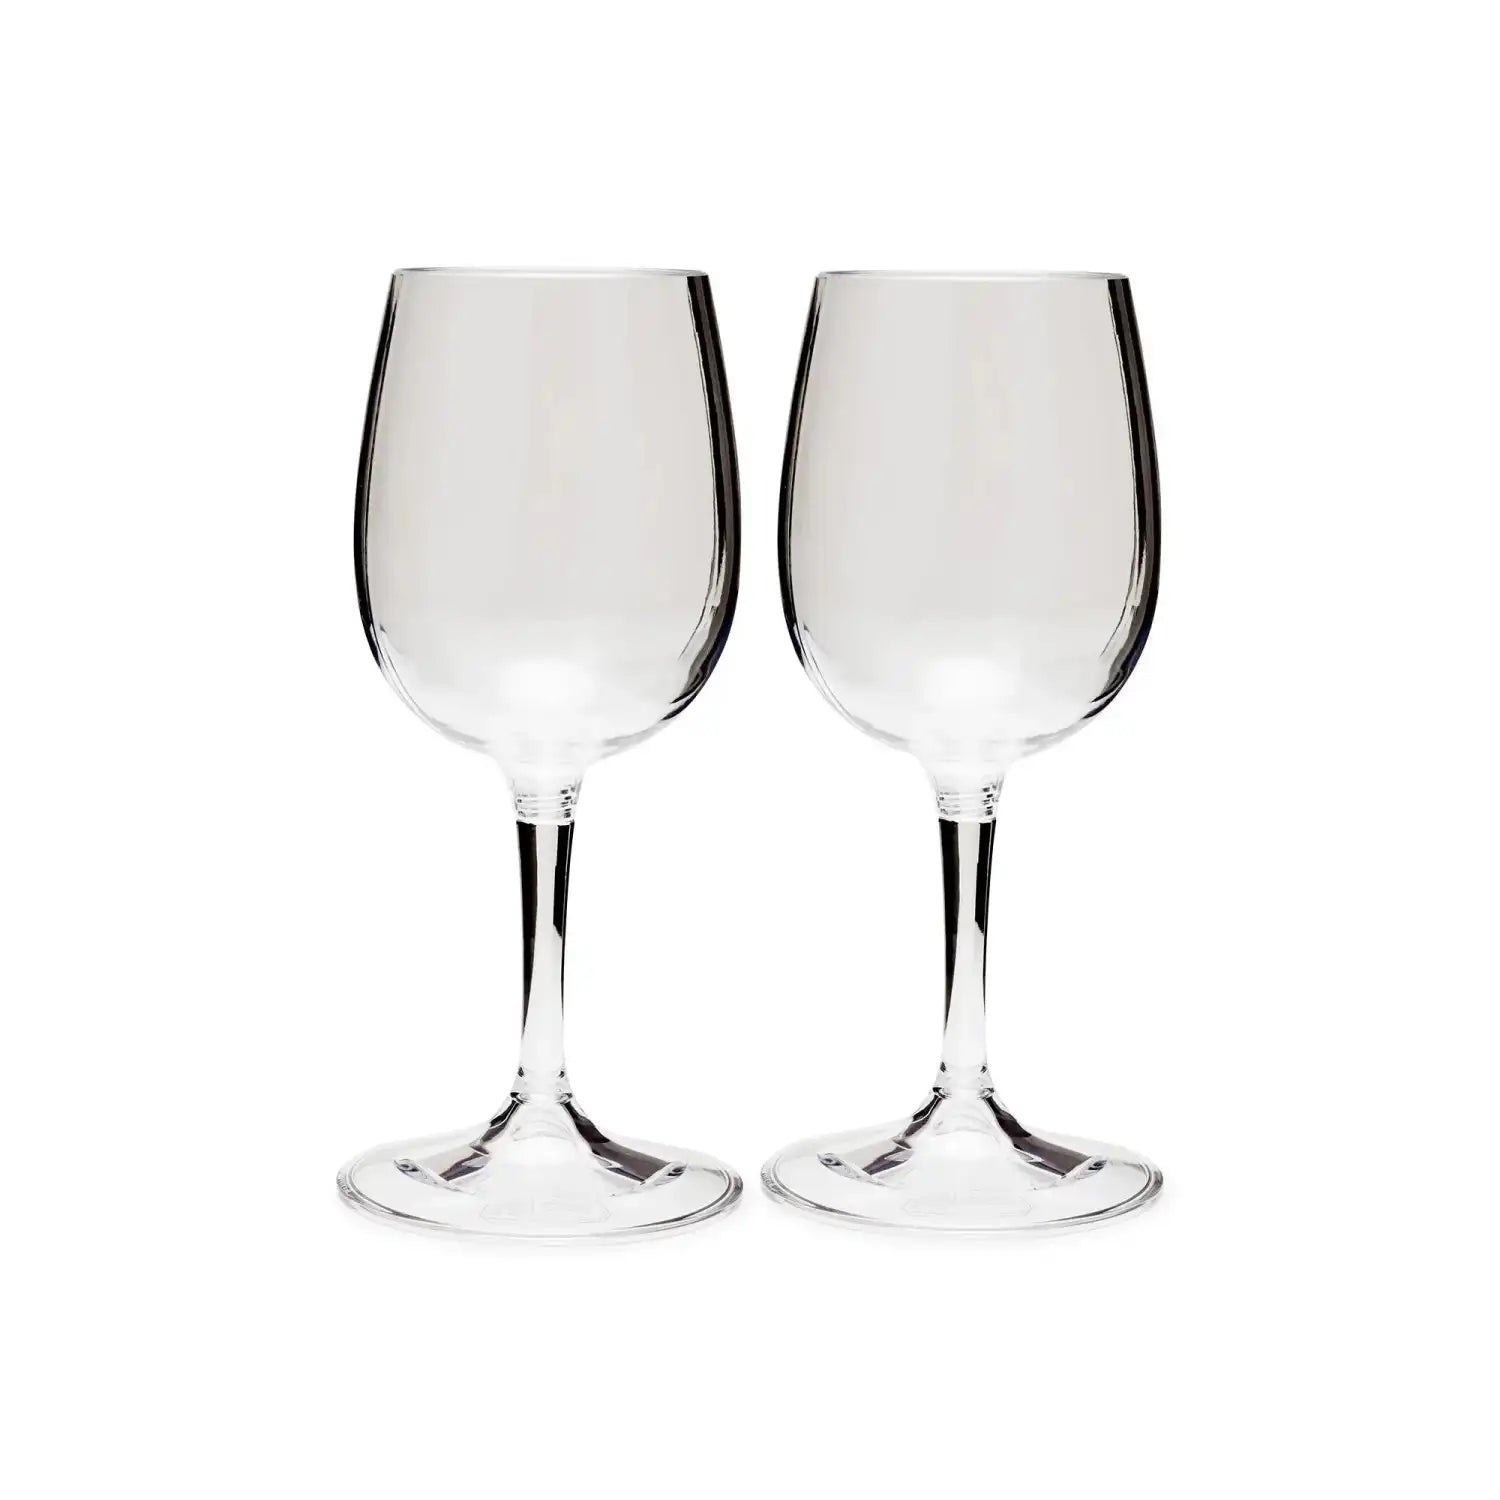 GSI Nesting Wine Glass Set, front view of glasses empty